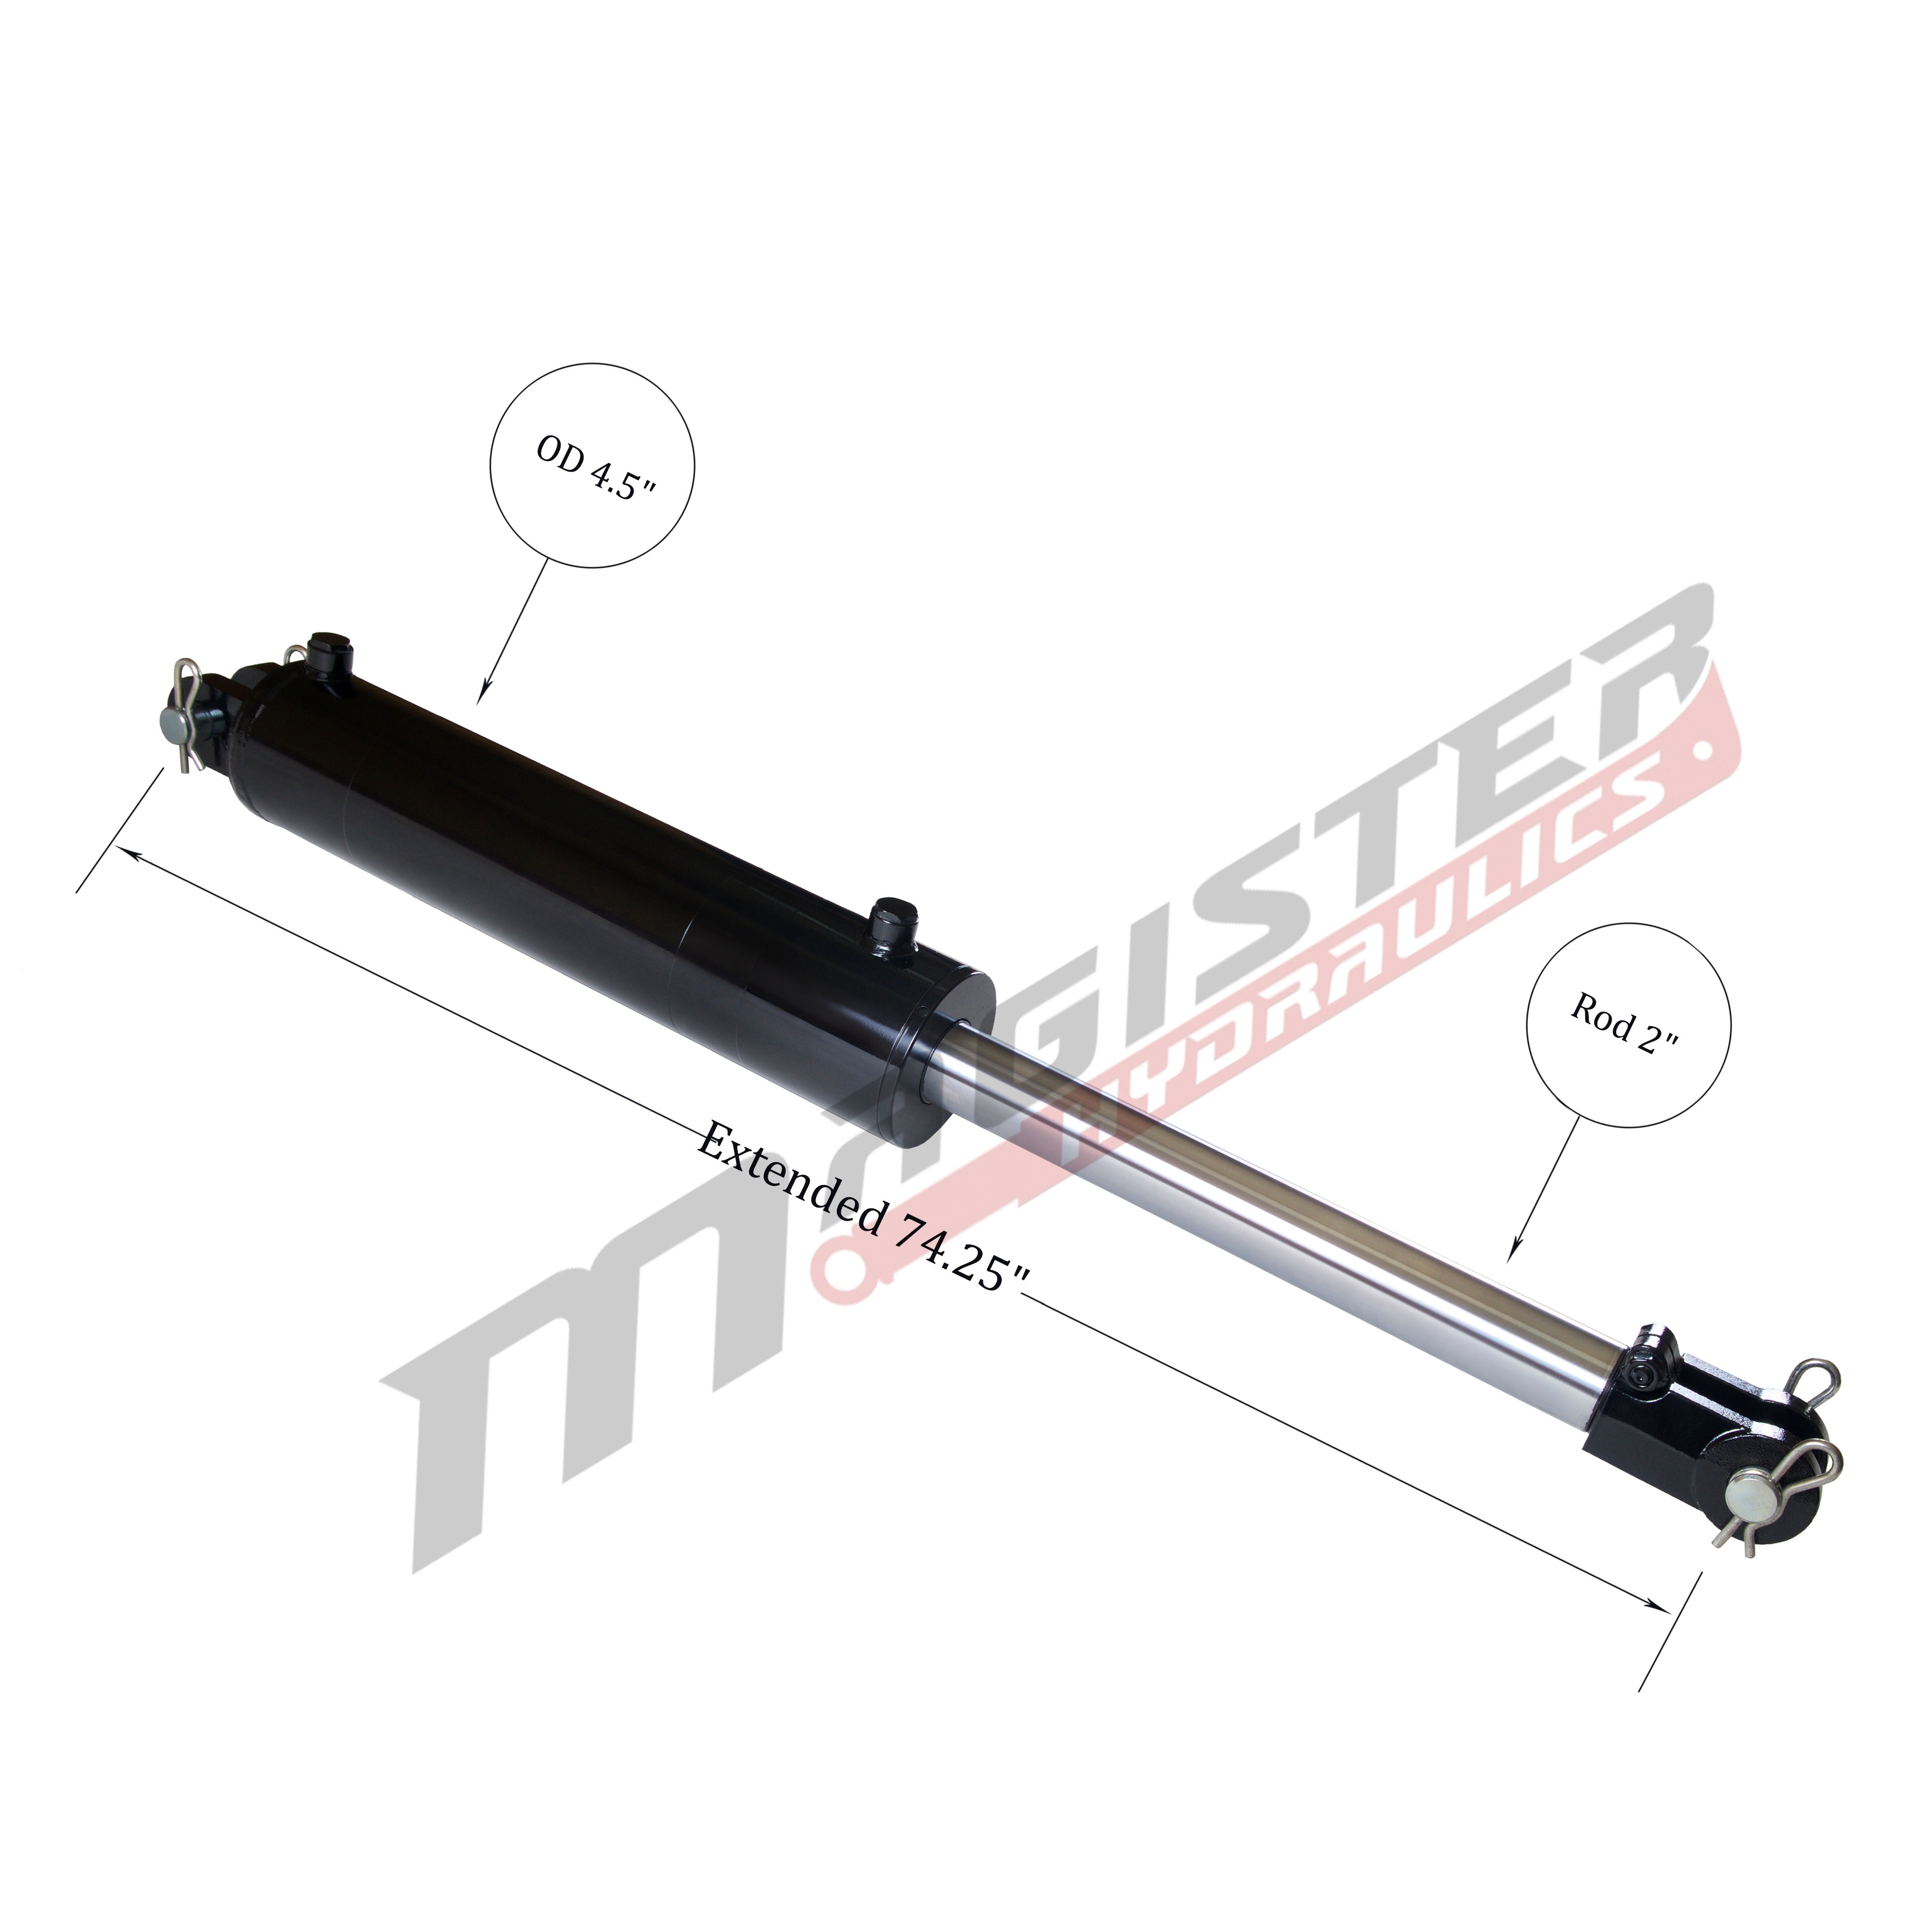 4 bore x 32 stroke hydraulic cylinder, welded clevis double acting cylinder | Magister Hydraulics